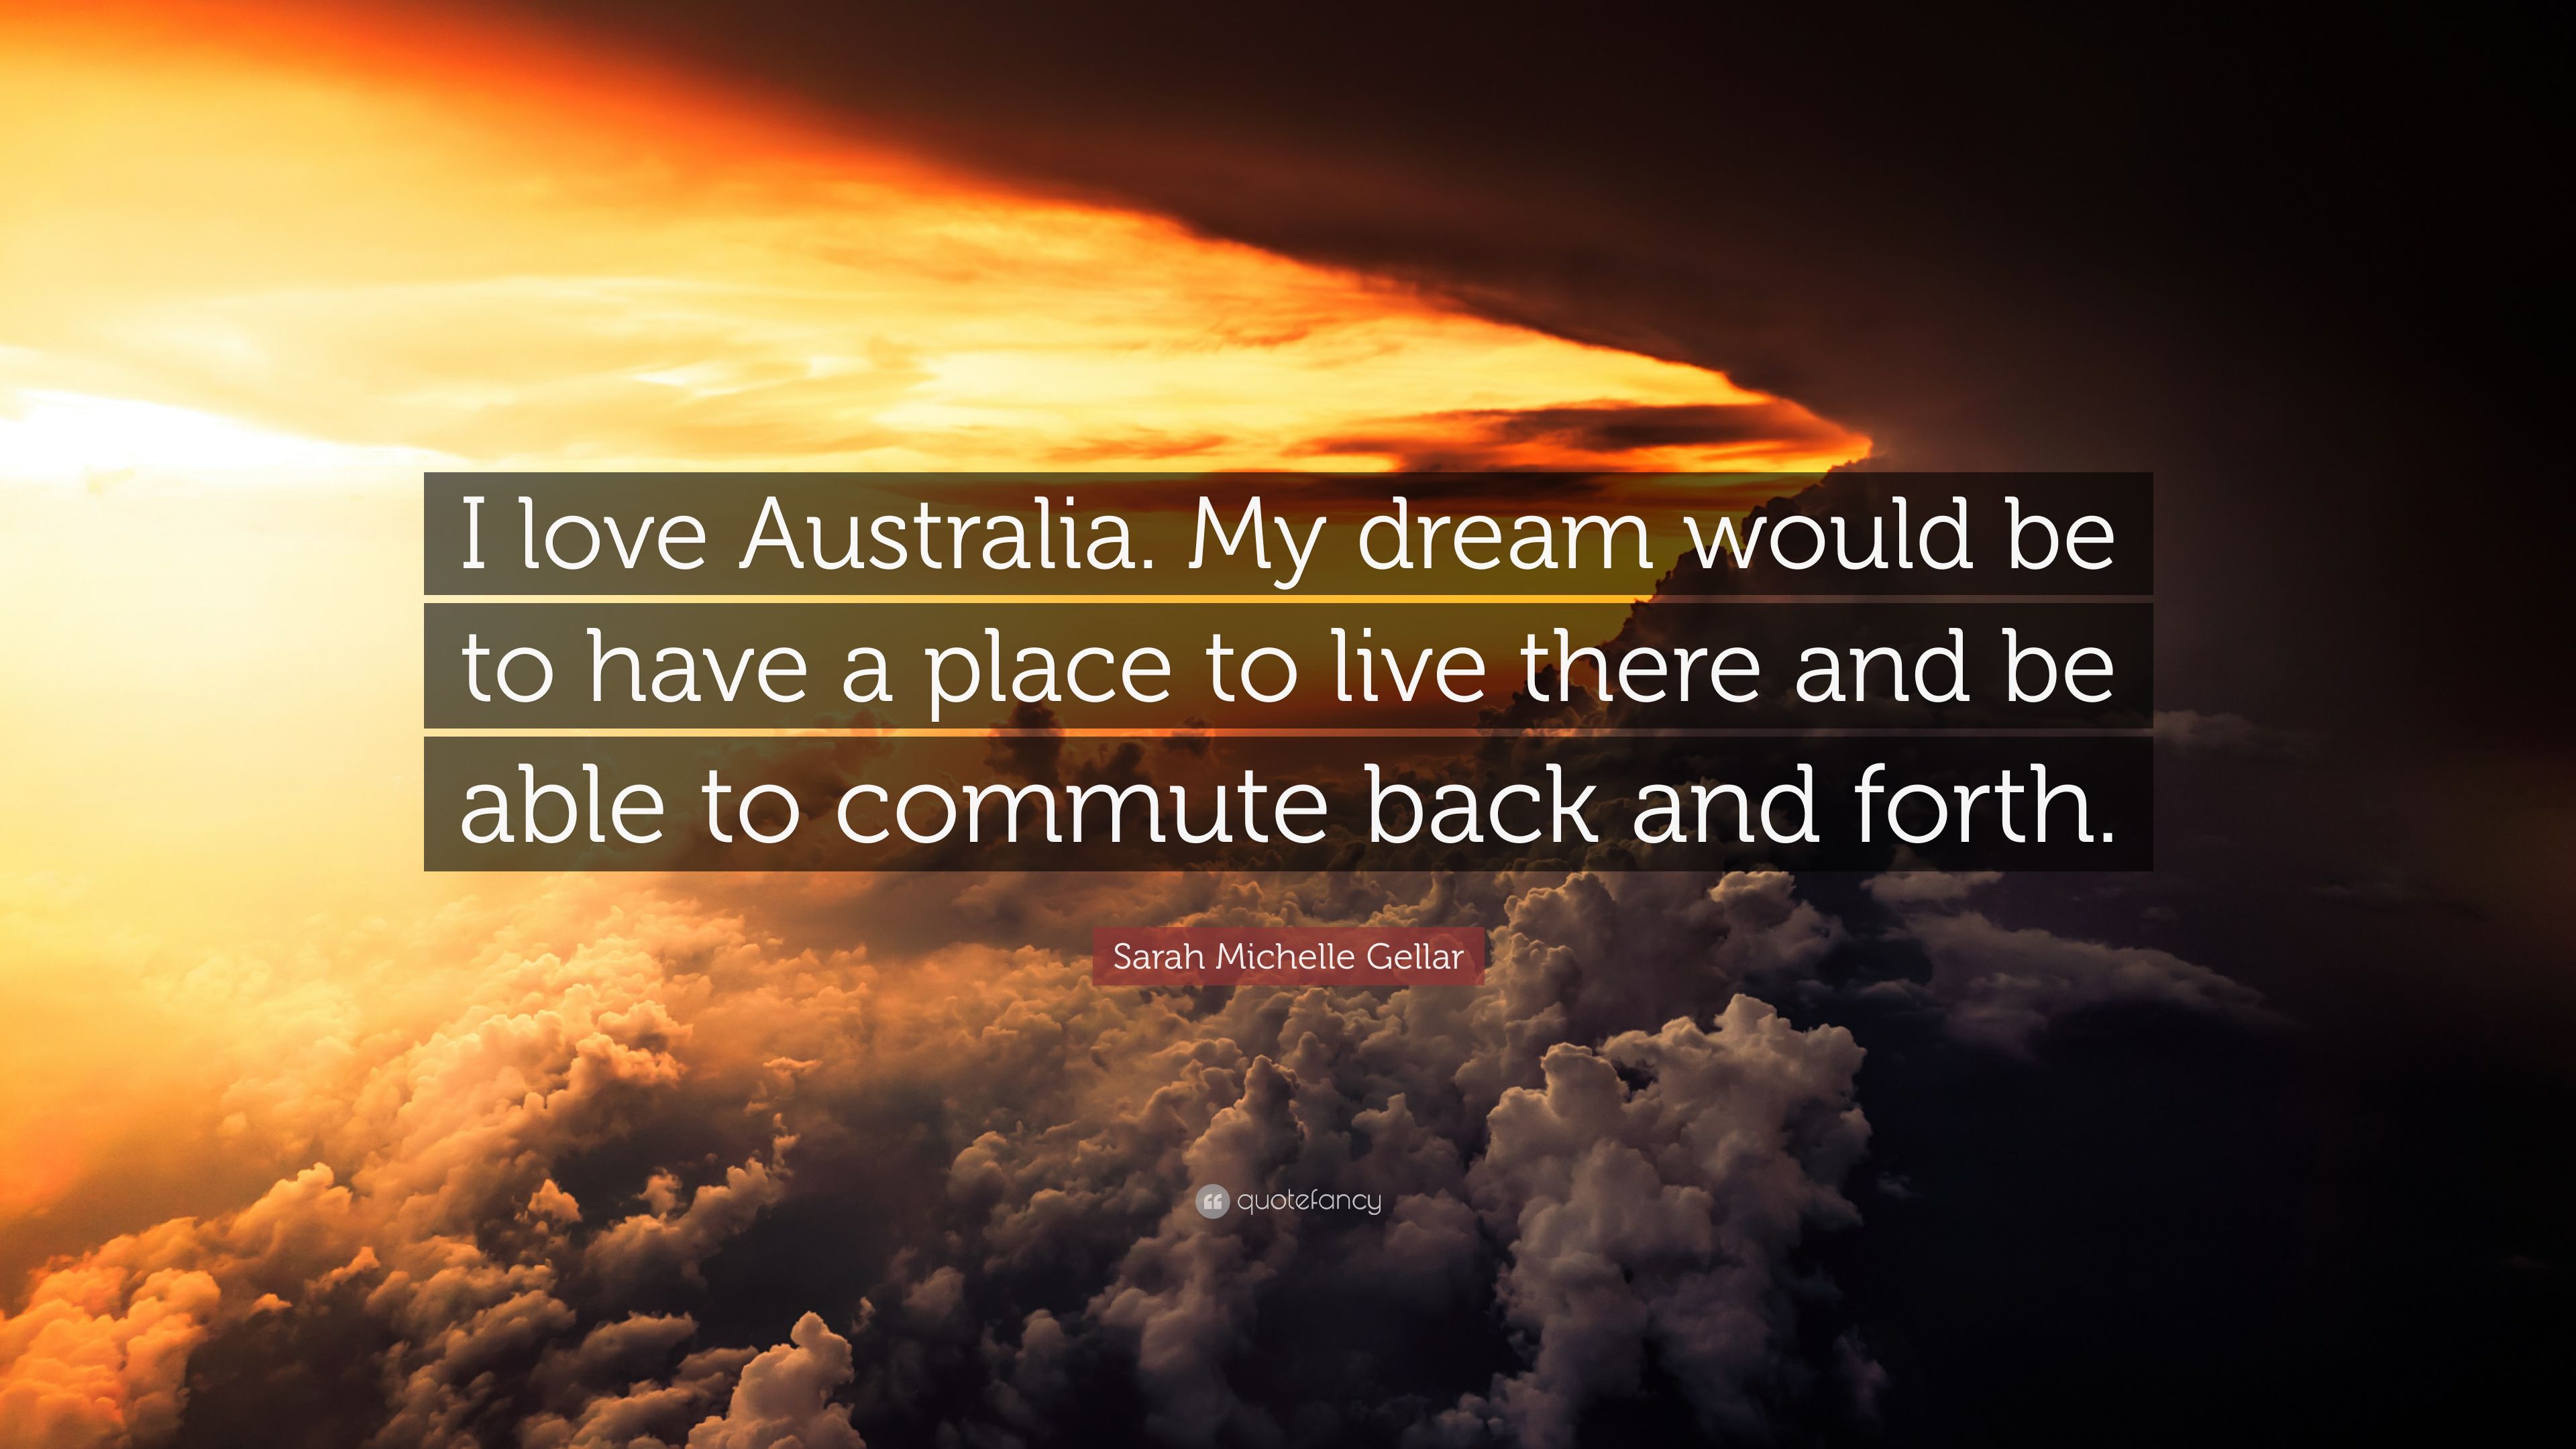 Sarah Michelle Gellar Quote: “I love Australia. My dream would be to have a place to live there and be able to commute back and forth.” (7 wallpaper)